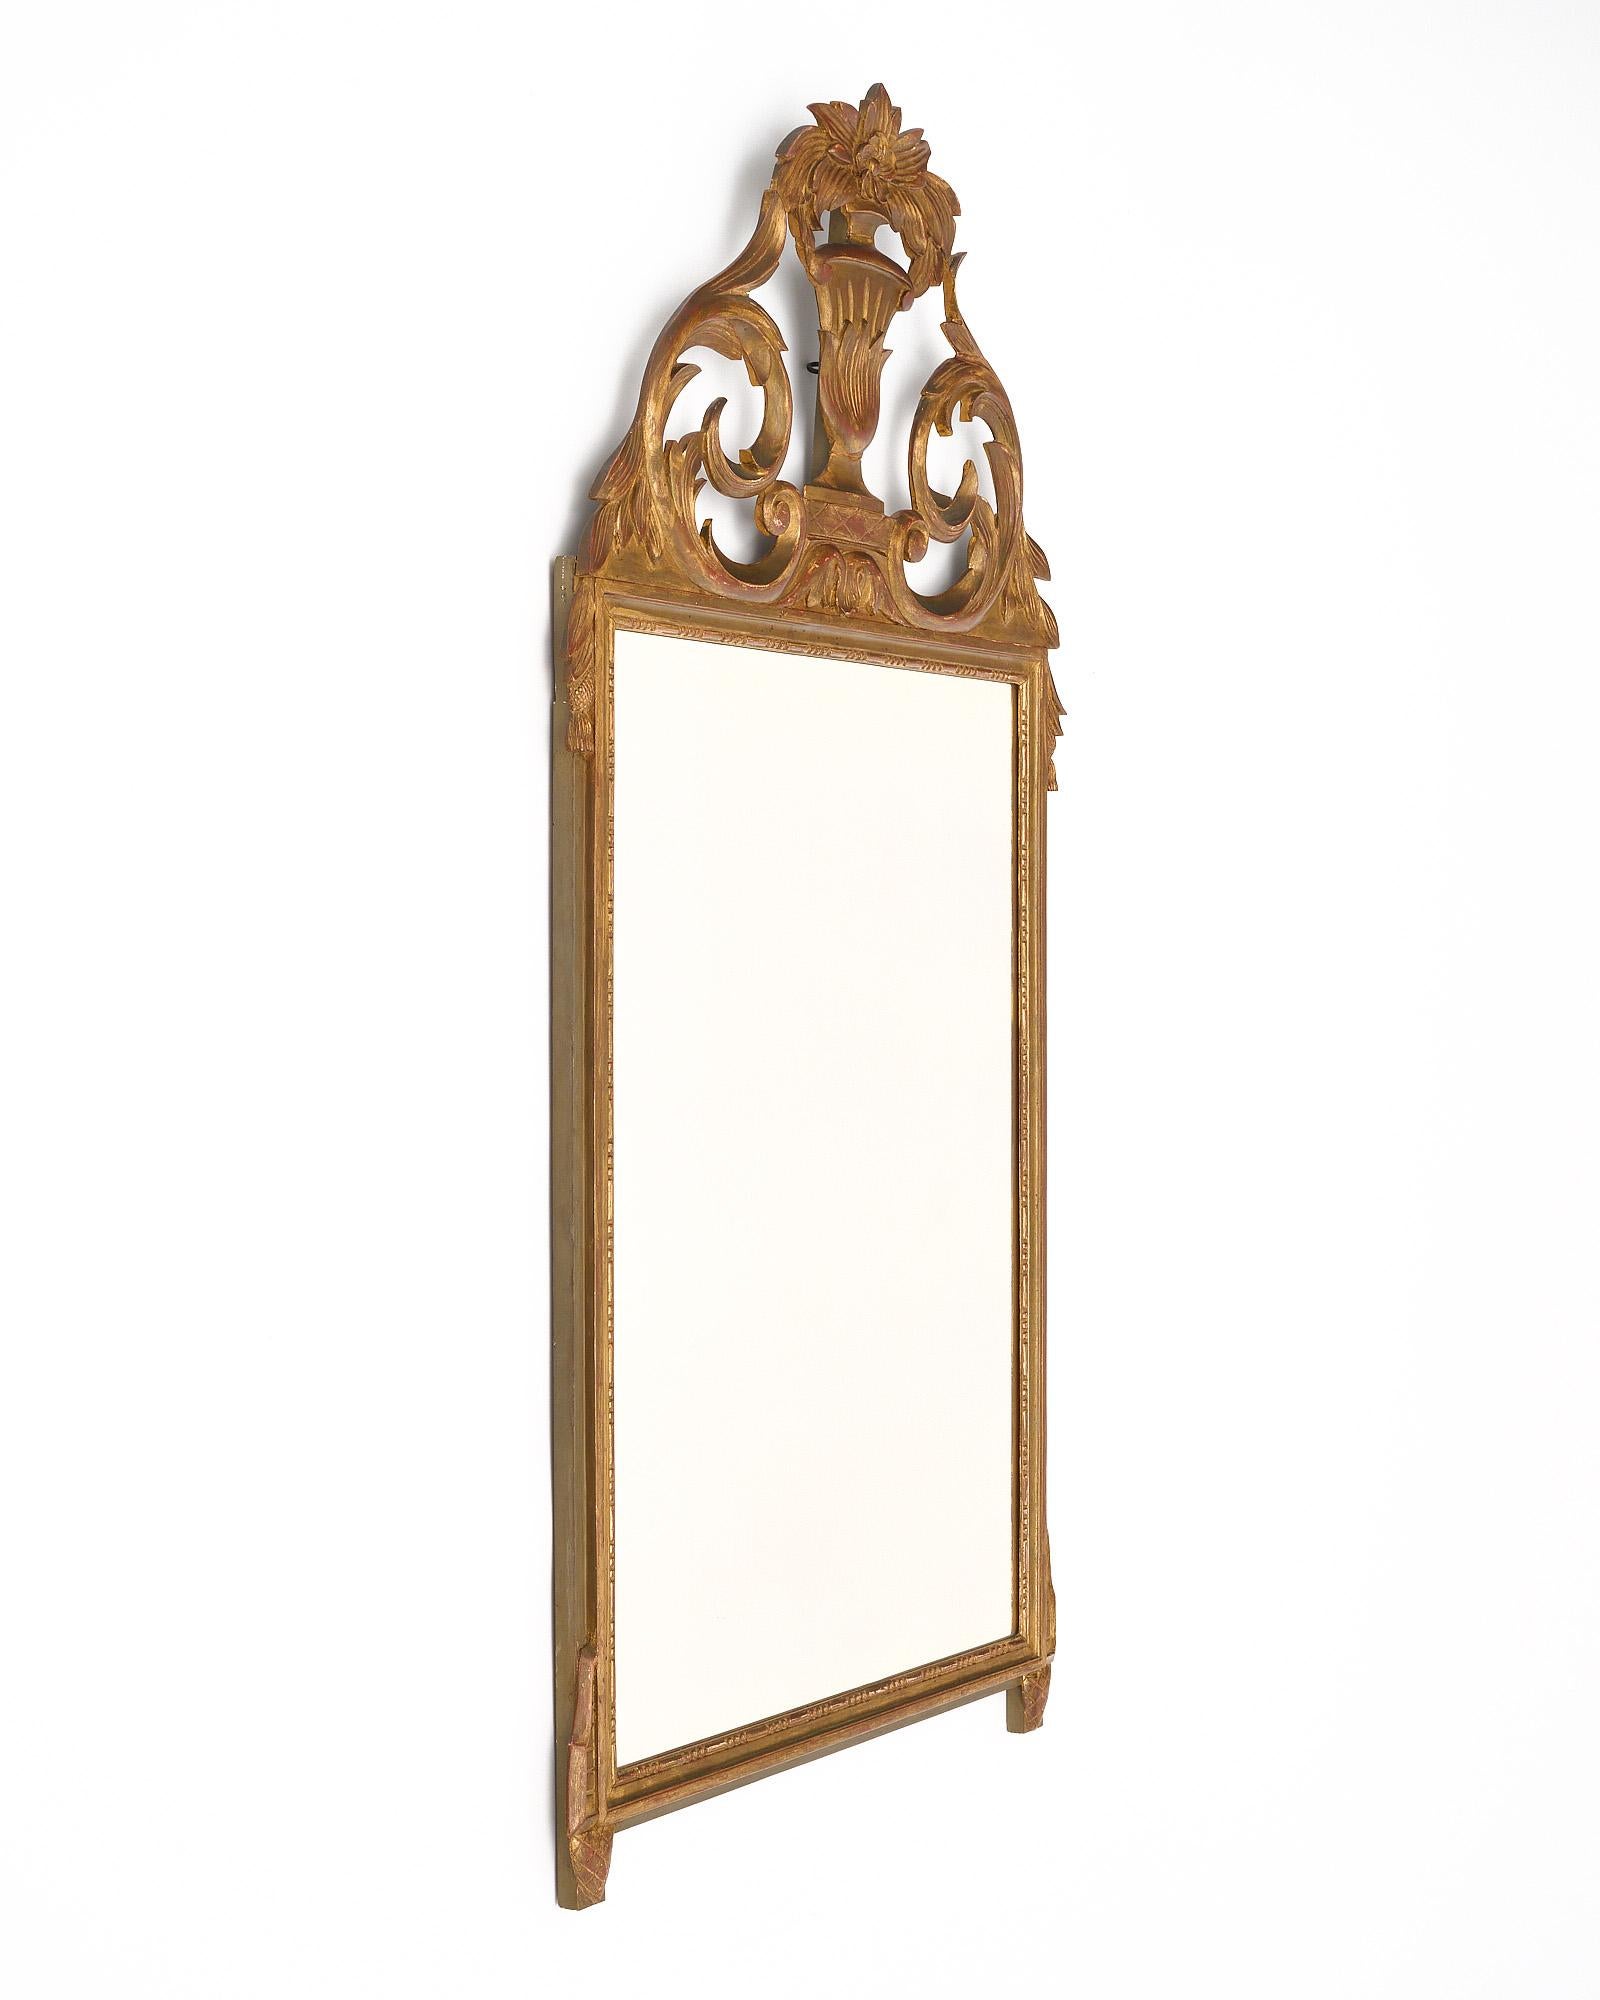 Mirror from France in the Louis XVI style. This piece is made of stuccoed hand-carved wood with a fronton that features an urn, floral motifs, and laurel leaves. The 24 carat gold leafing is original. Some repairs have been made to the frame.